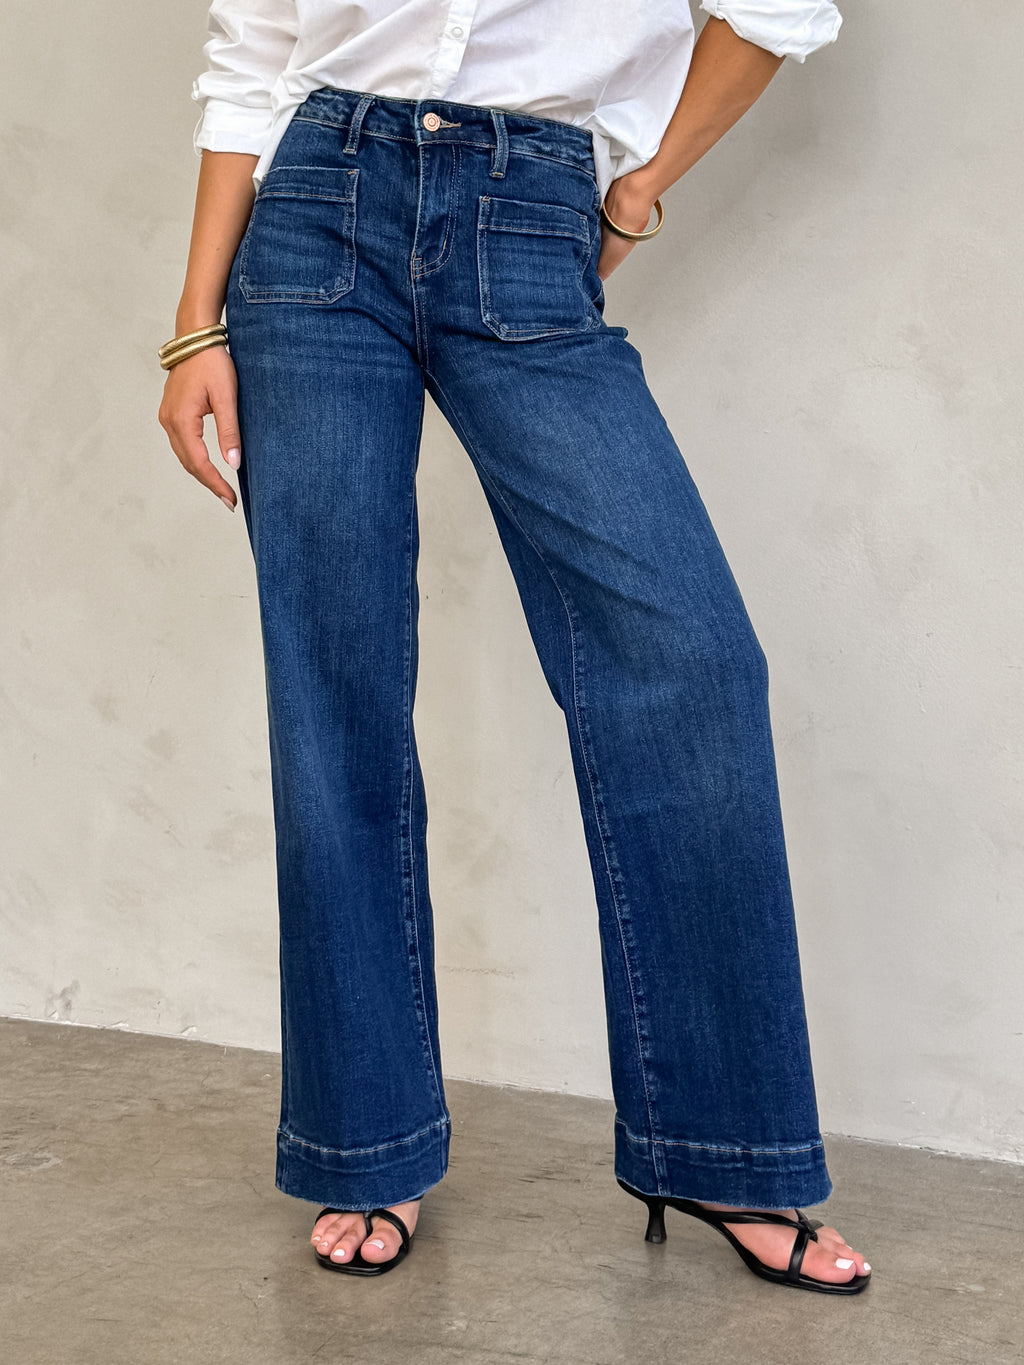 She Means Business Wide Leg Jeans - Stitch And Feather